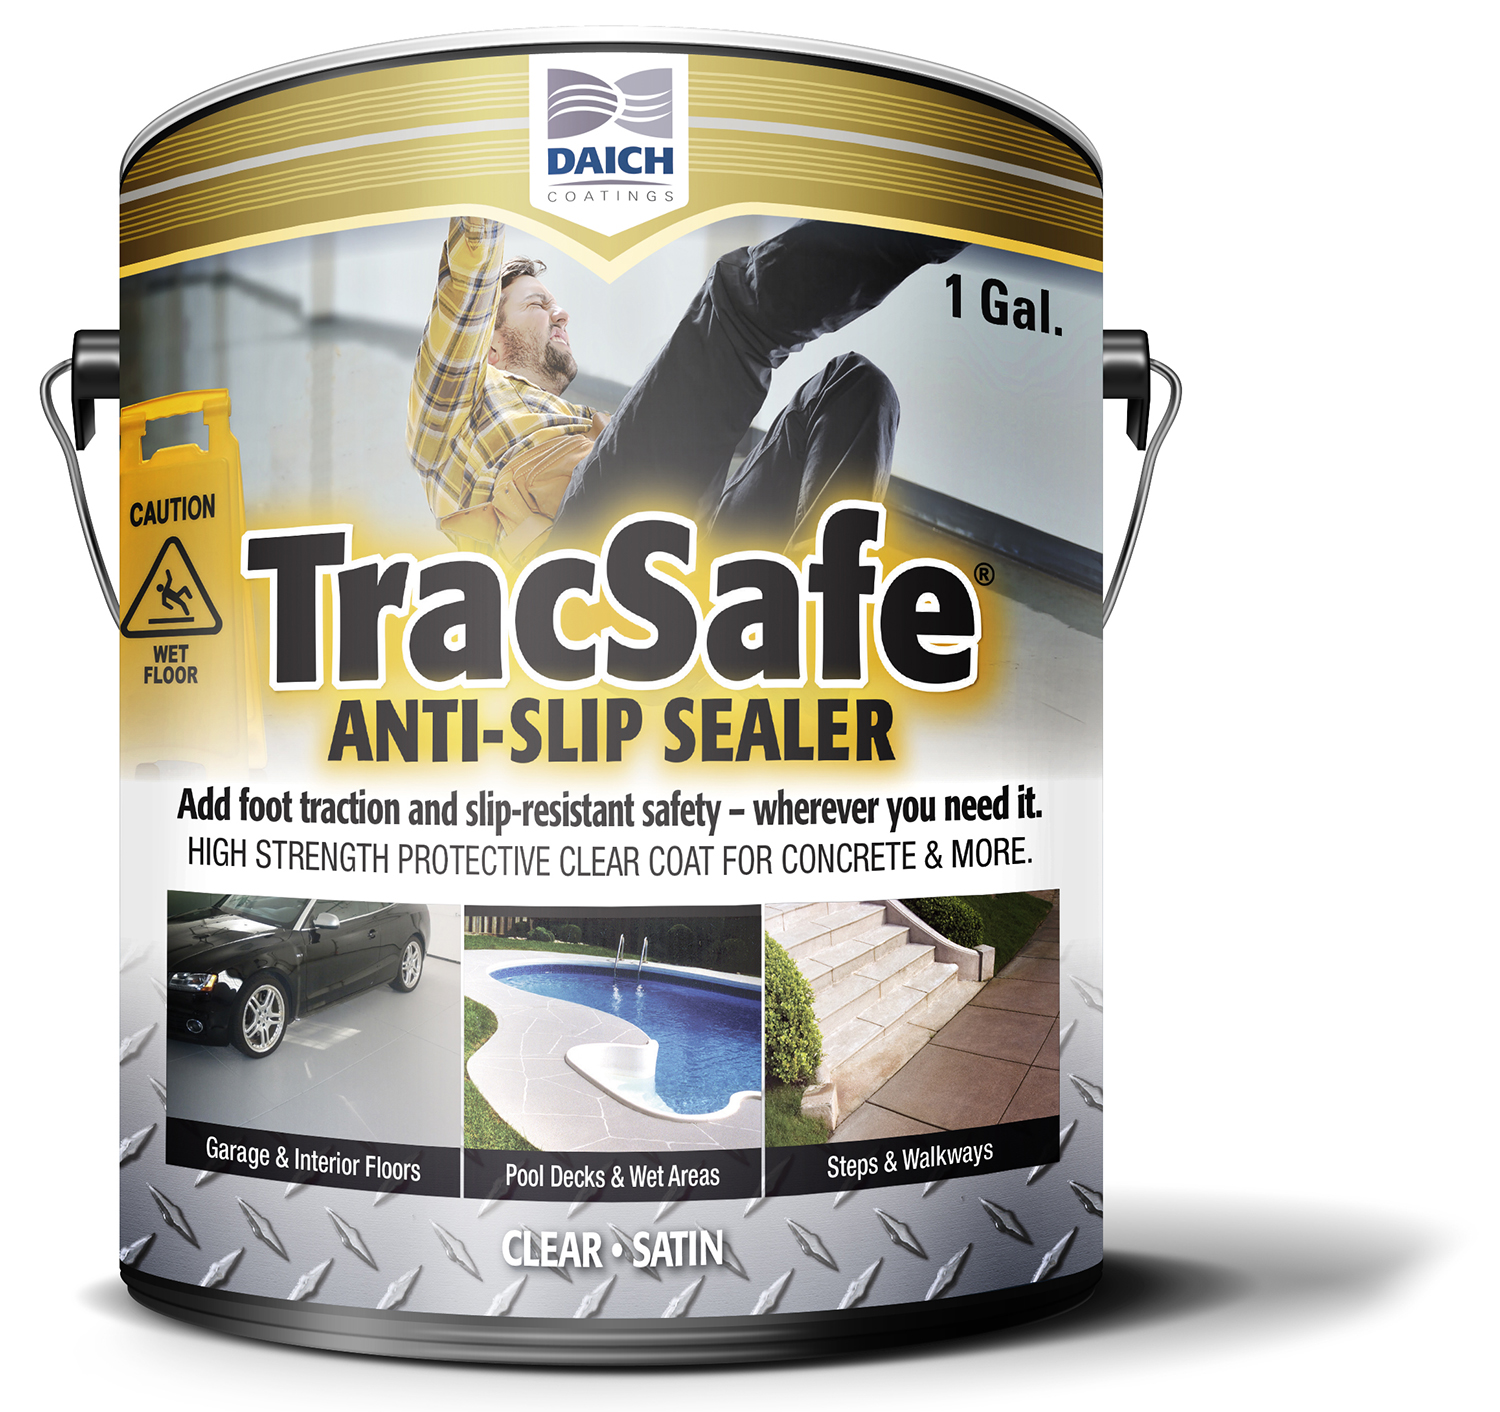 New TracSafe Anti-Slip Sealer from Daich Coatings provides aggressive anti-slip performance with all-weather durability. Roll on to steps, walkways, pool decks, garage floors and more to help prevent slips and falls. With anti-slip ratings up to twice the OSHA standard, TracSafe can be used in both residential and commercial settings. Available now online at The Home Depot and www.daichcoatings.com. 